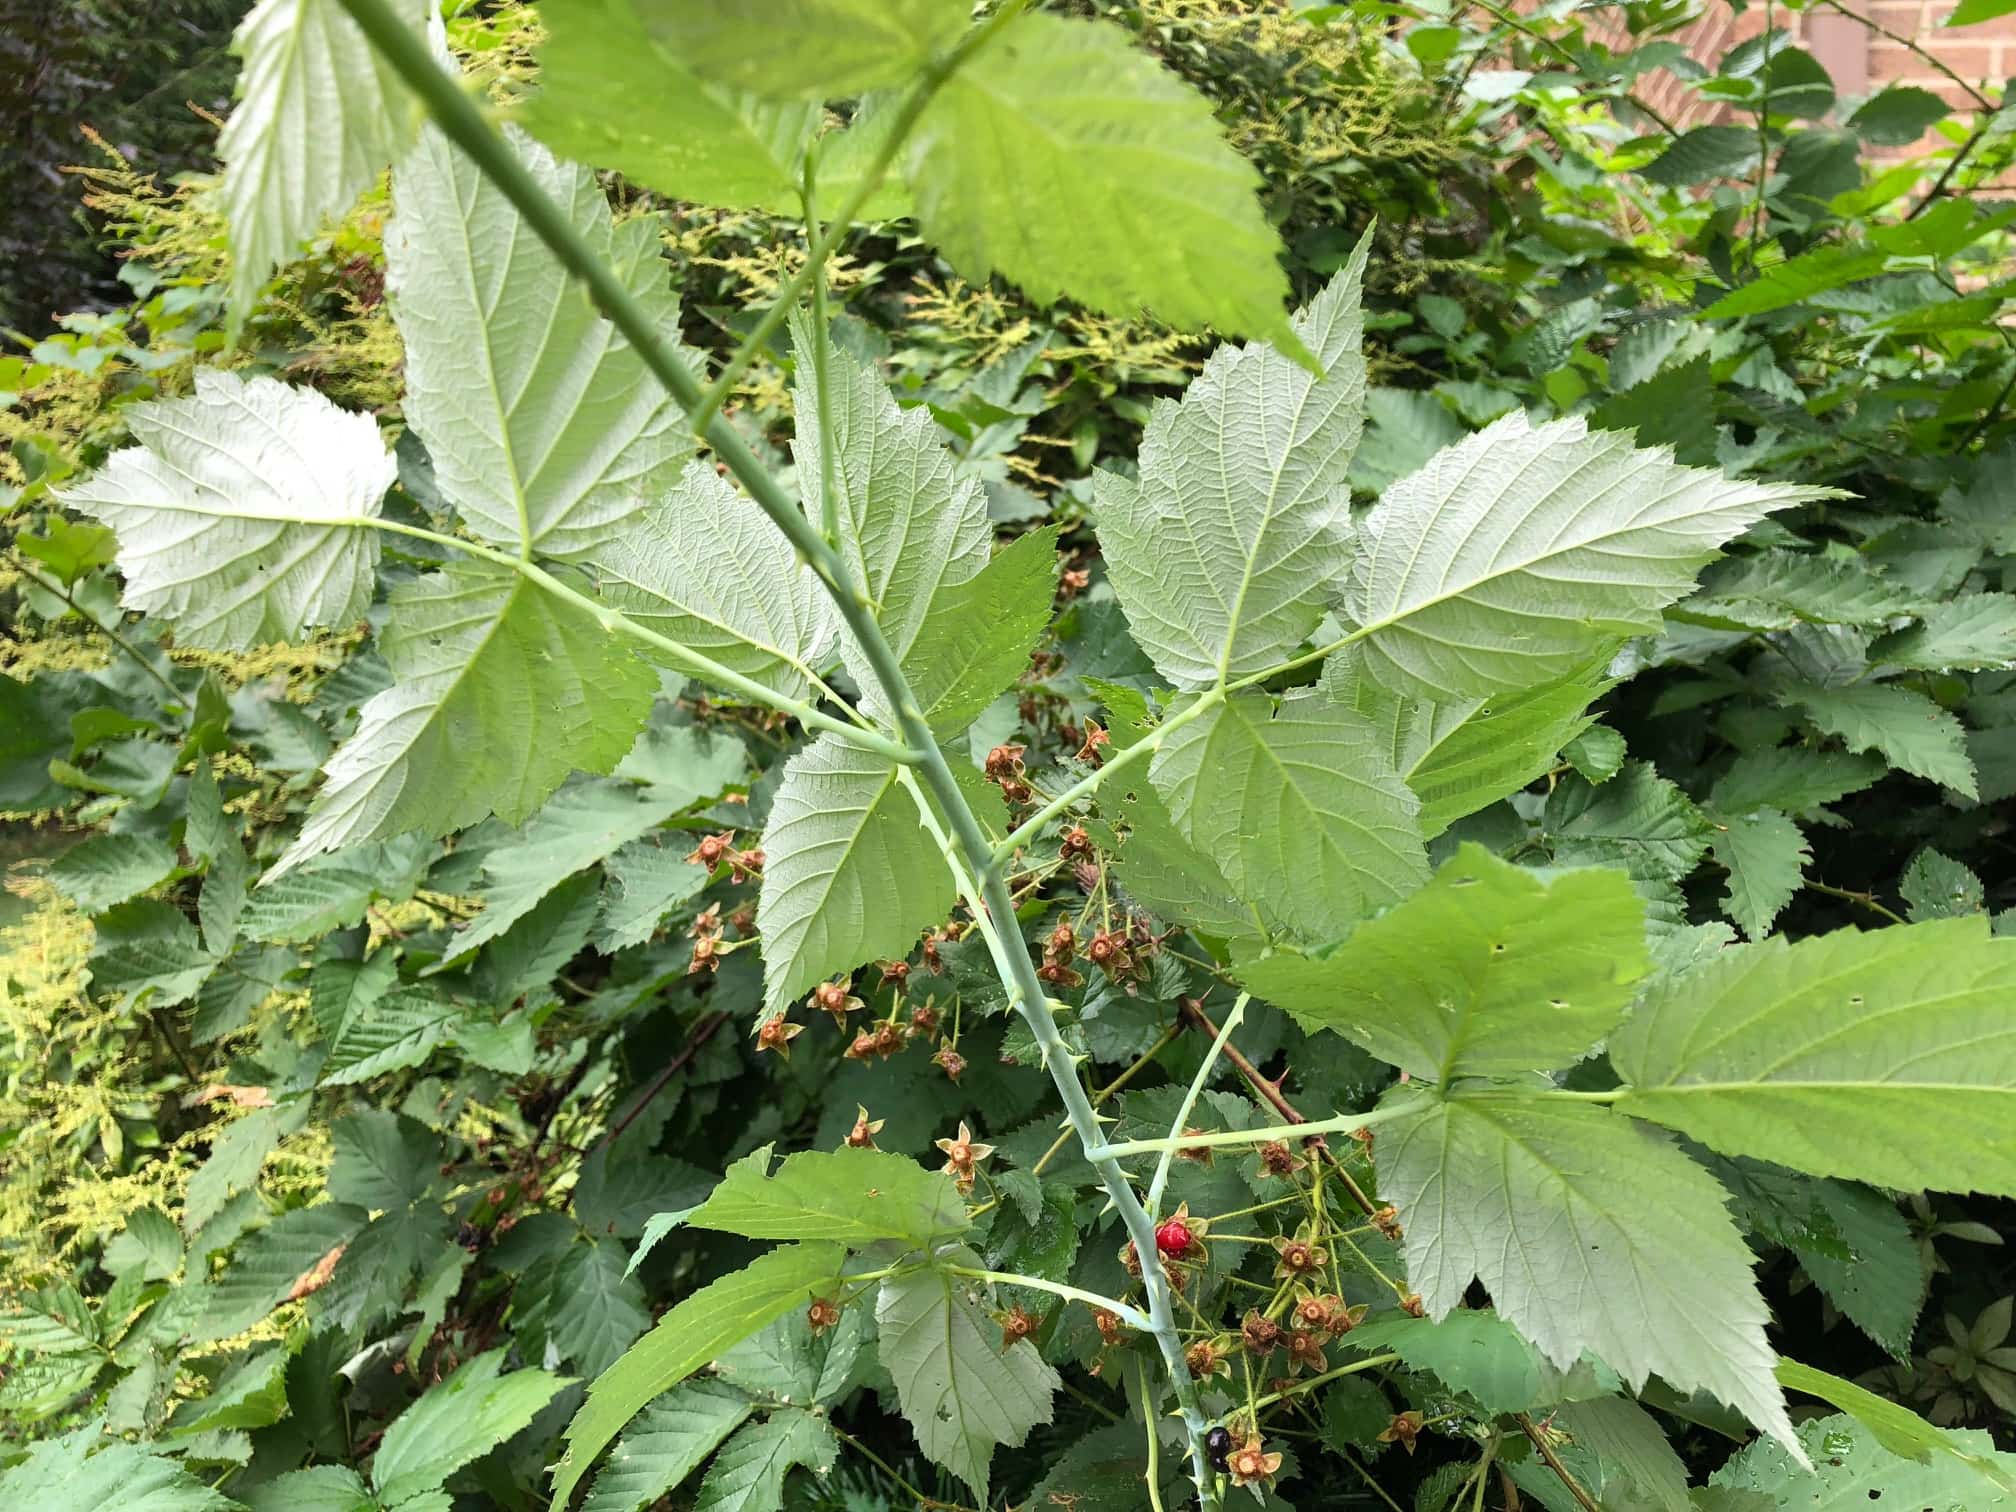 Blackberry leaves and stems